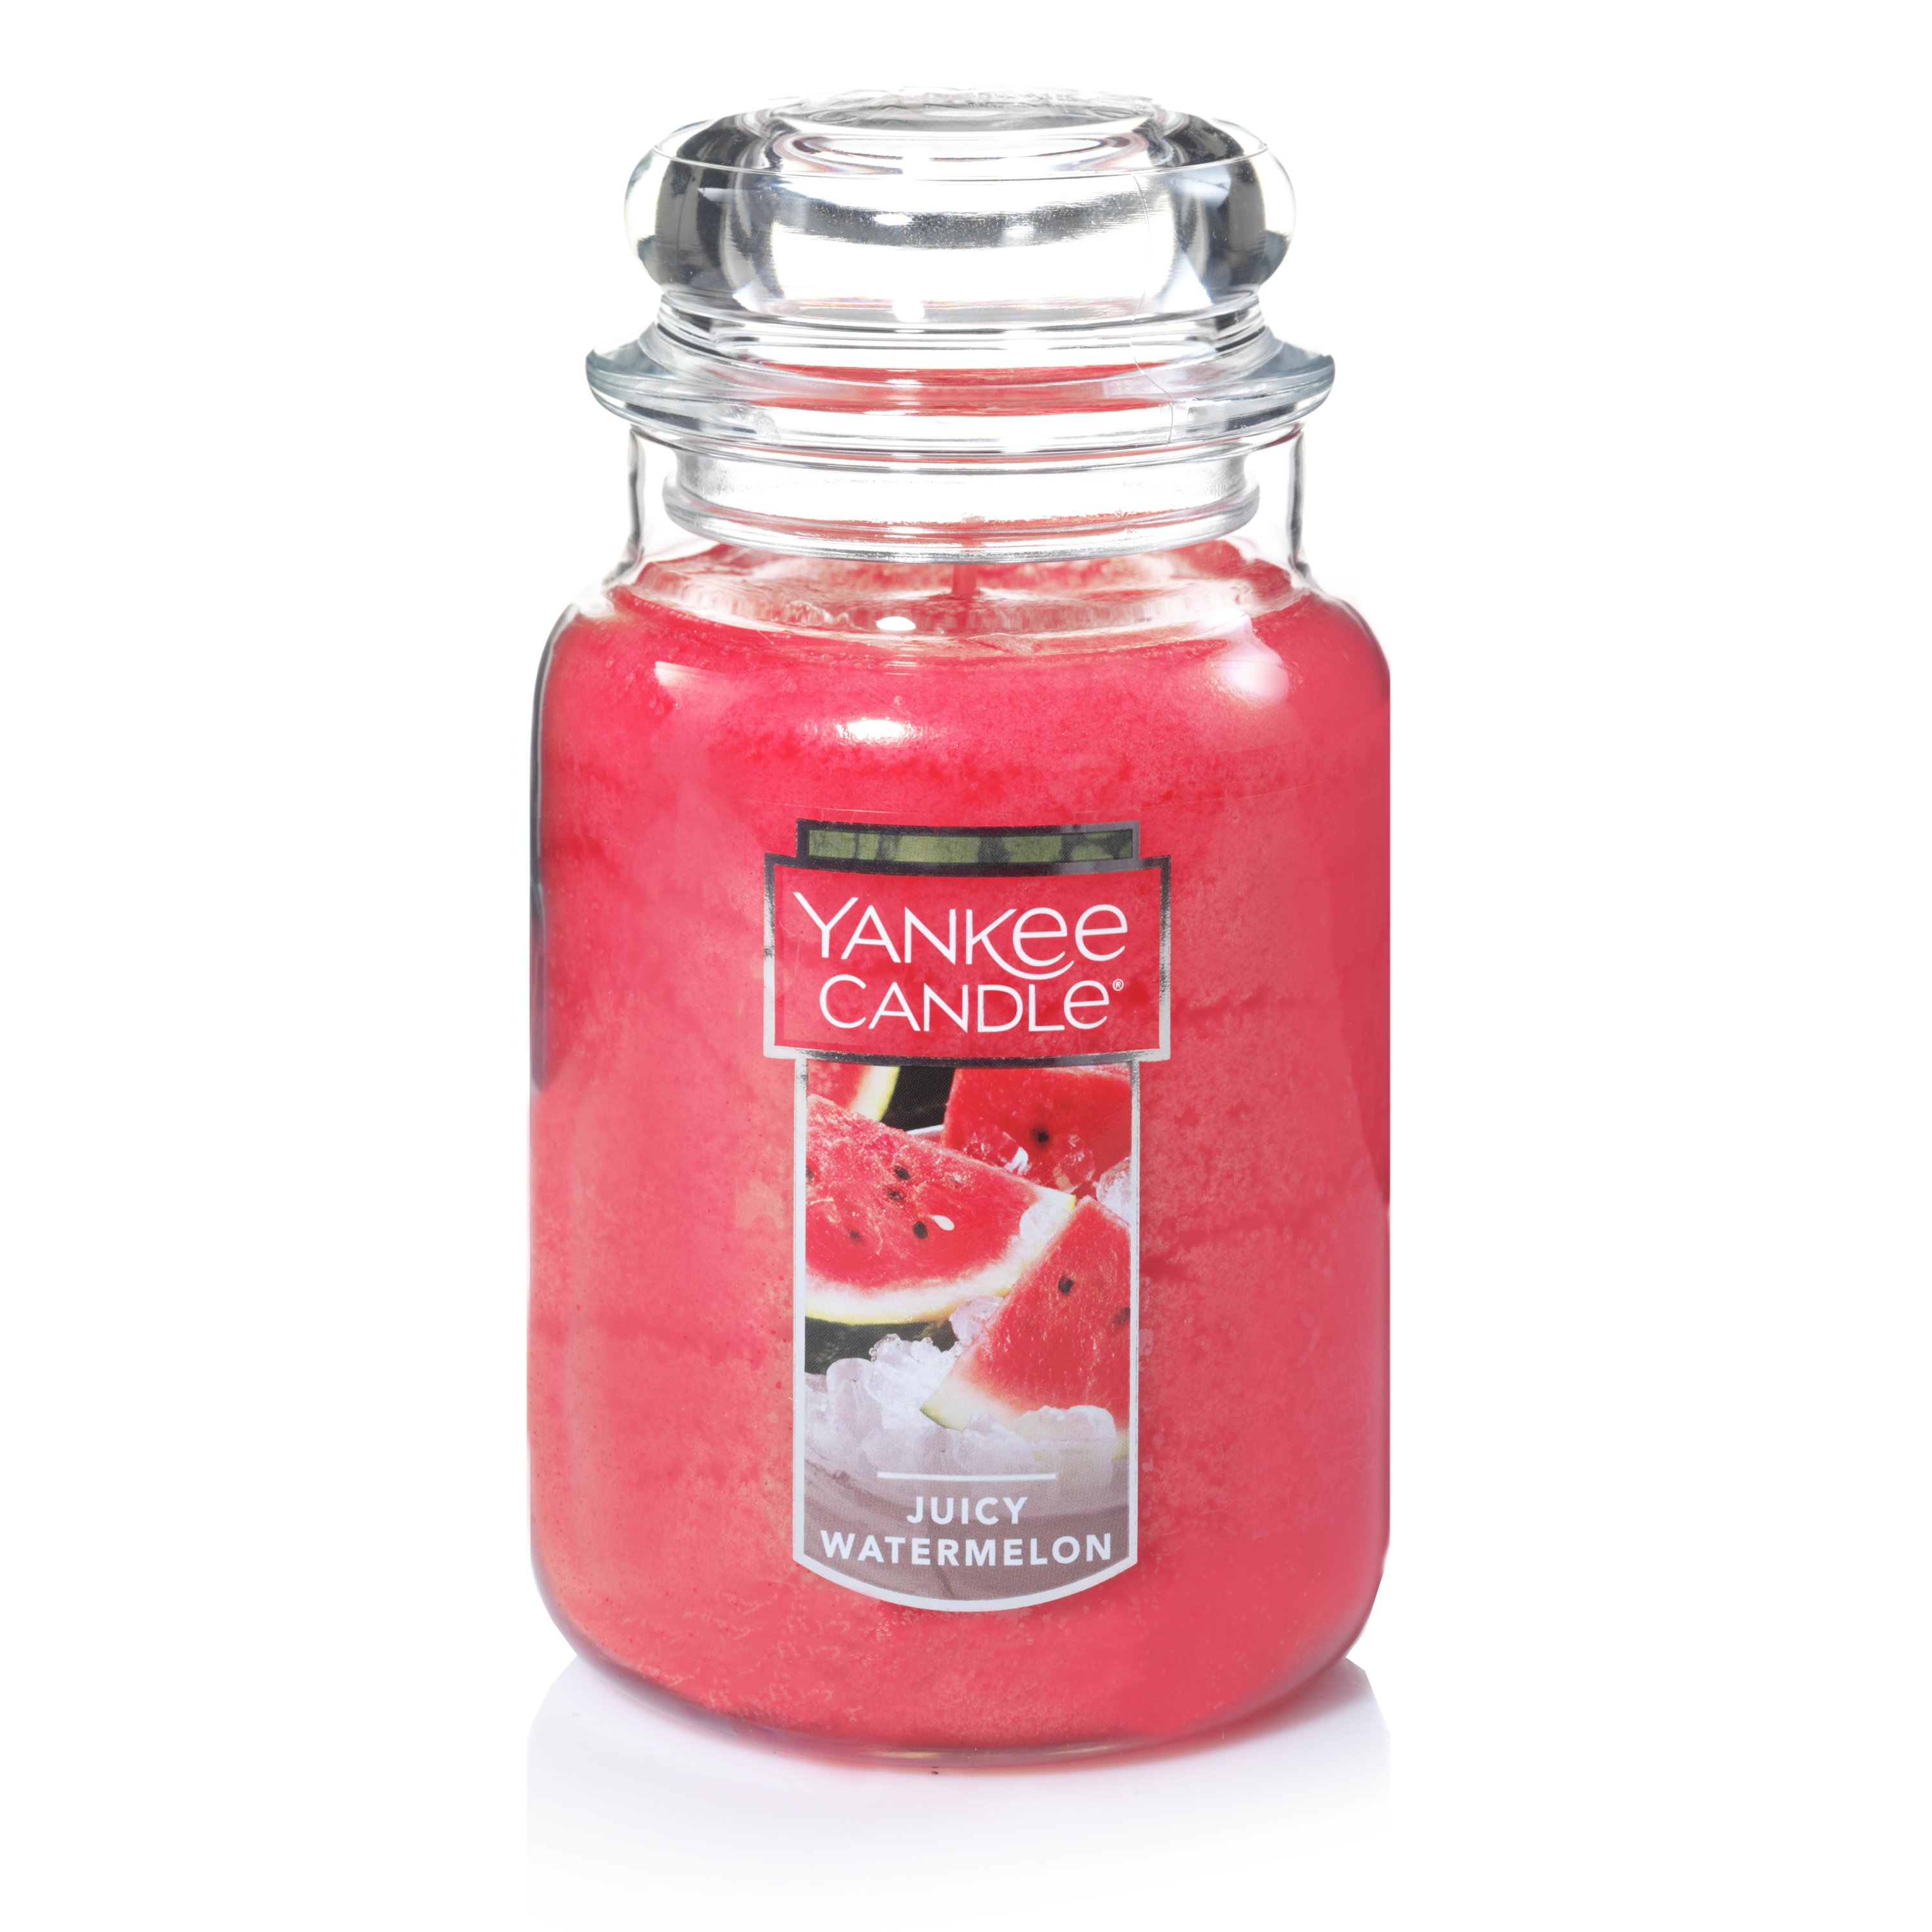 YANKEE CANDLE WATERMELON WHITE SANDS HARBOR BREEZE SCENTED SOY WAX CANDLE 